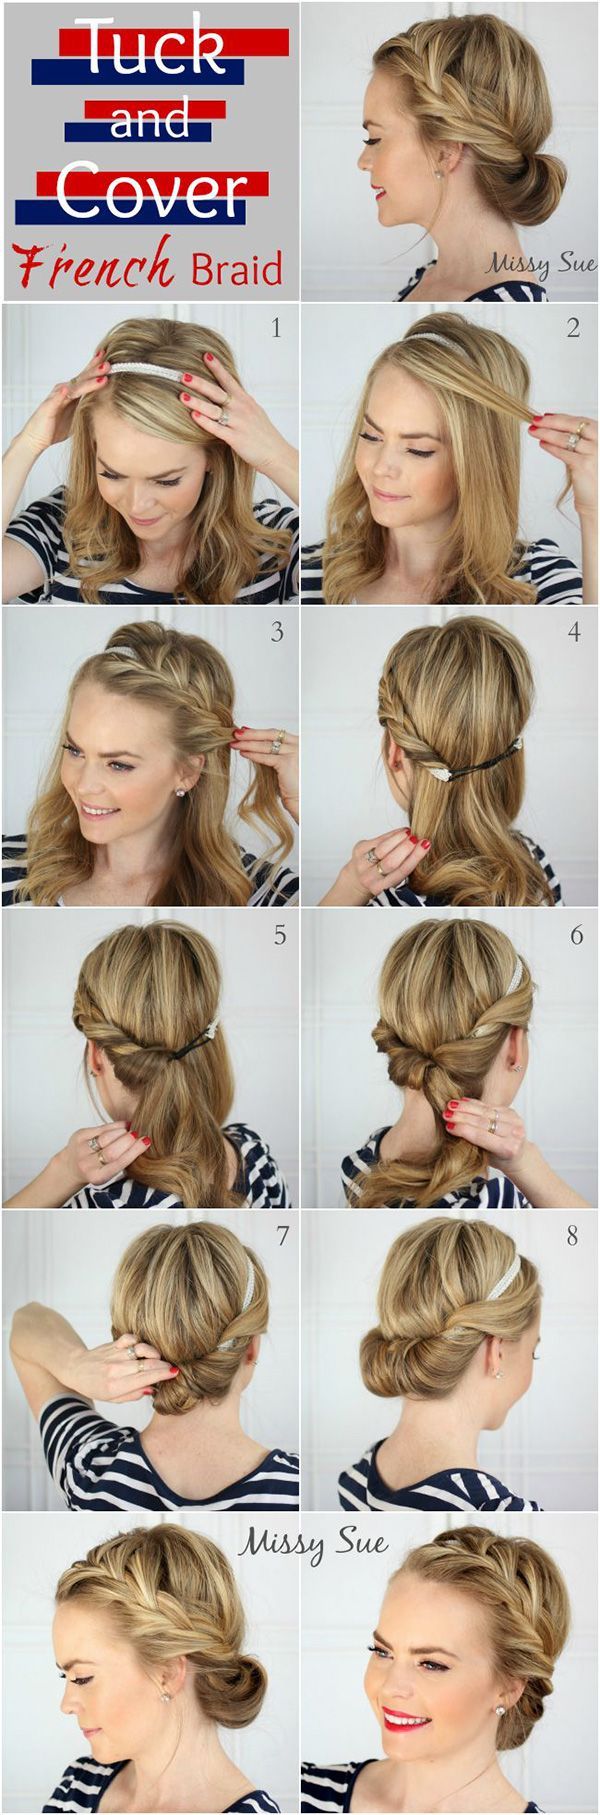 10 Easy Hairstyles For Bangs To Get Them Out Of Your Face | The Tuck and Cover French Braid